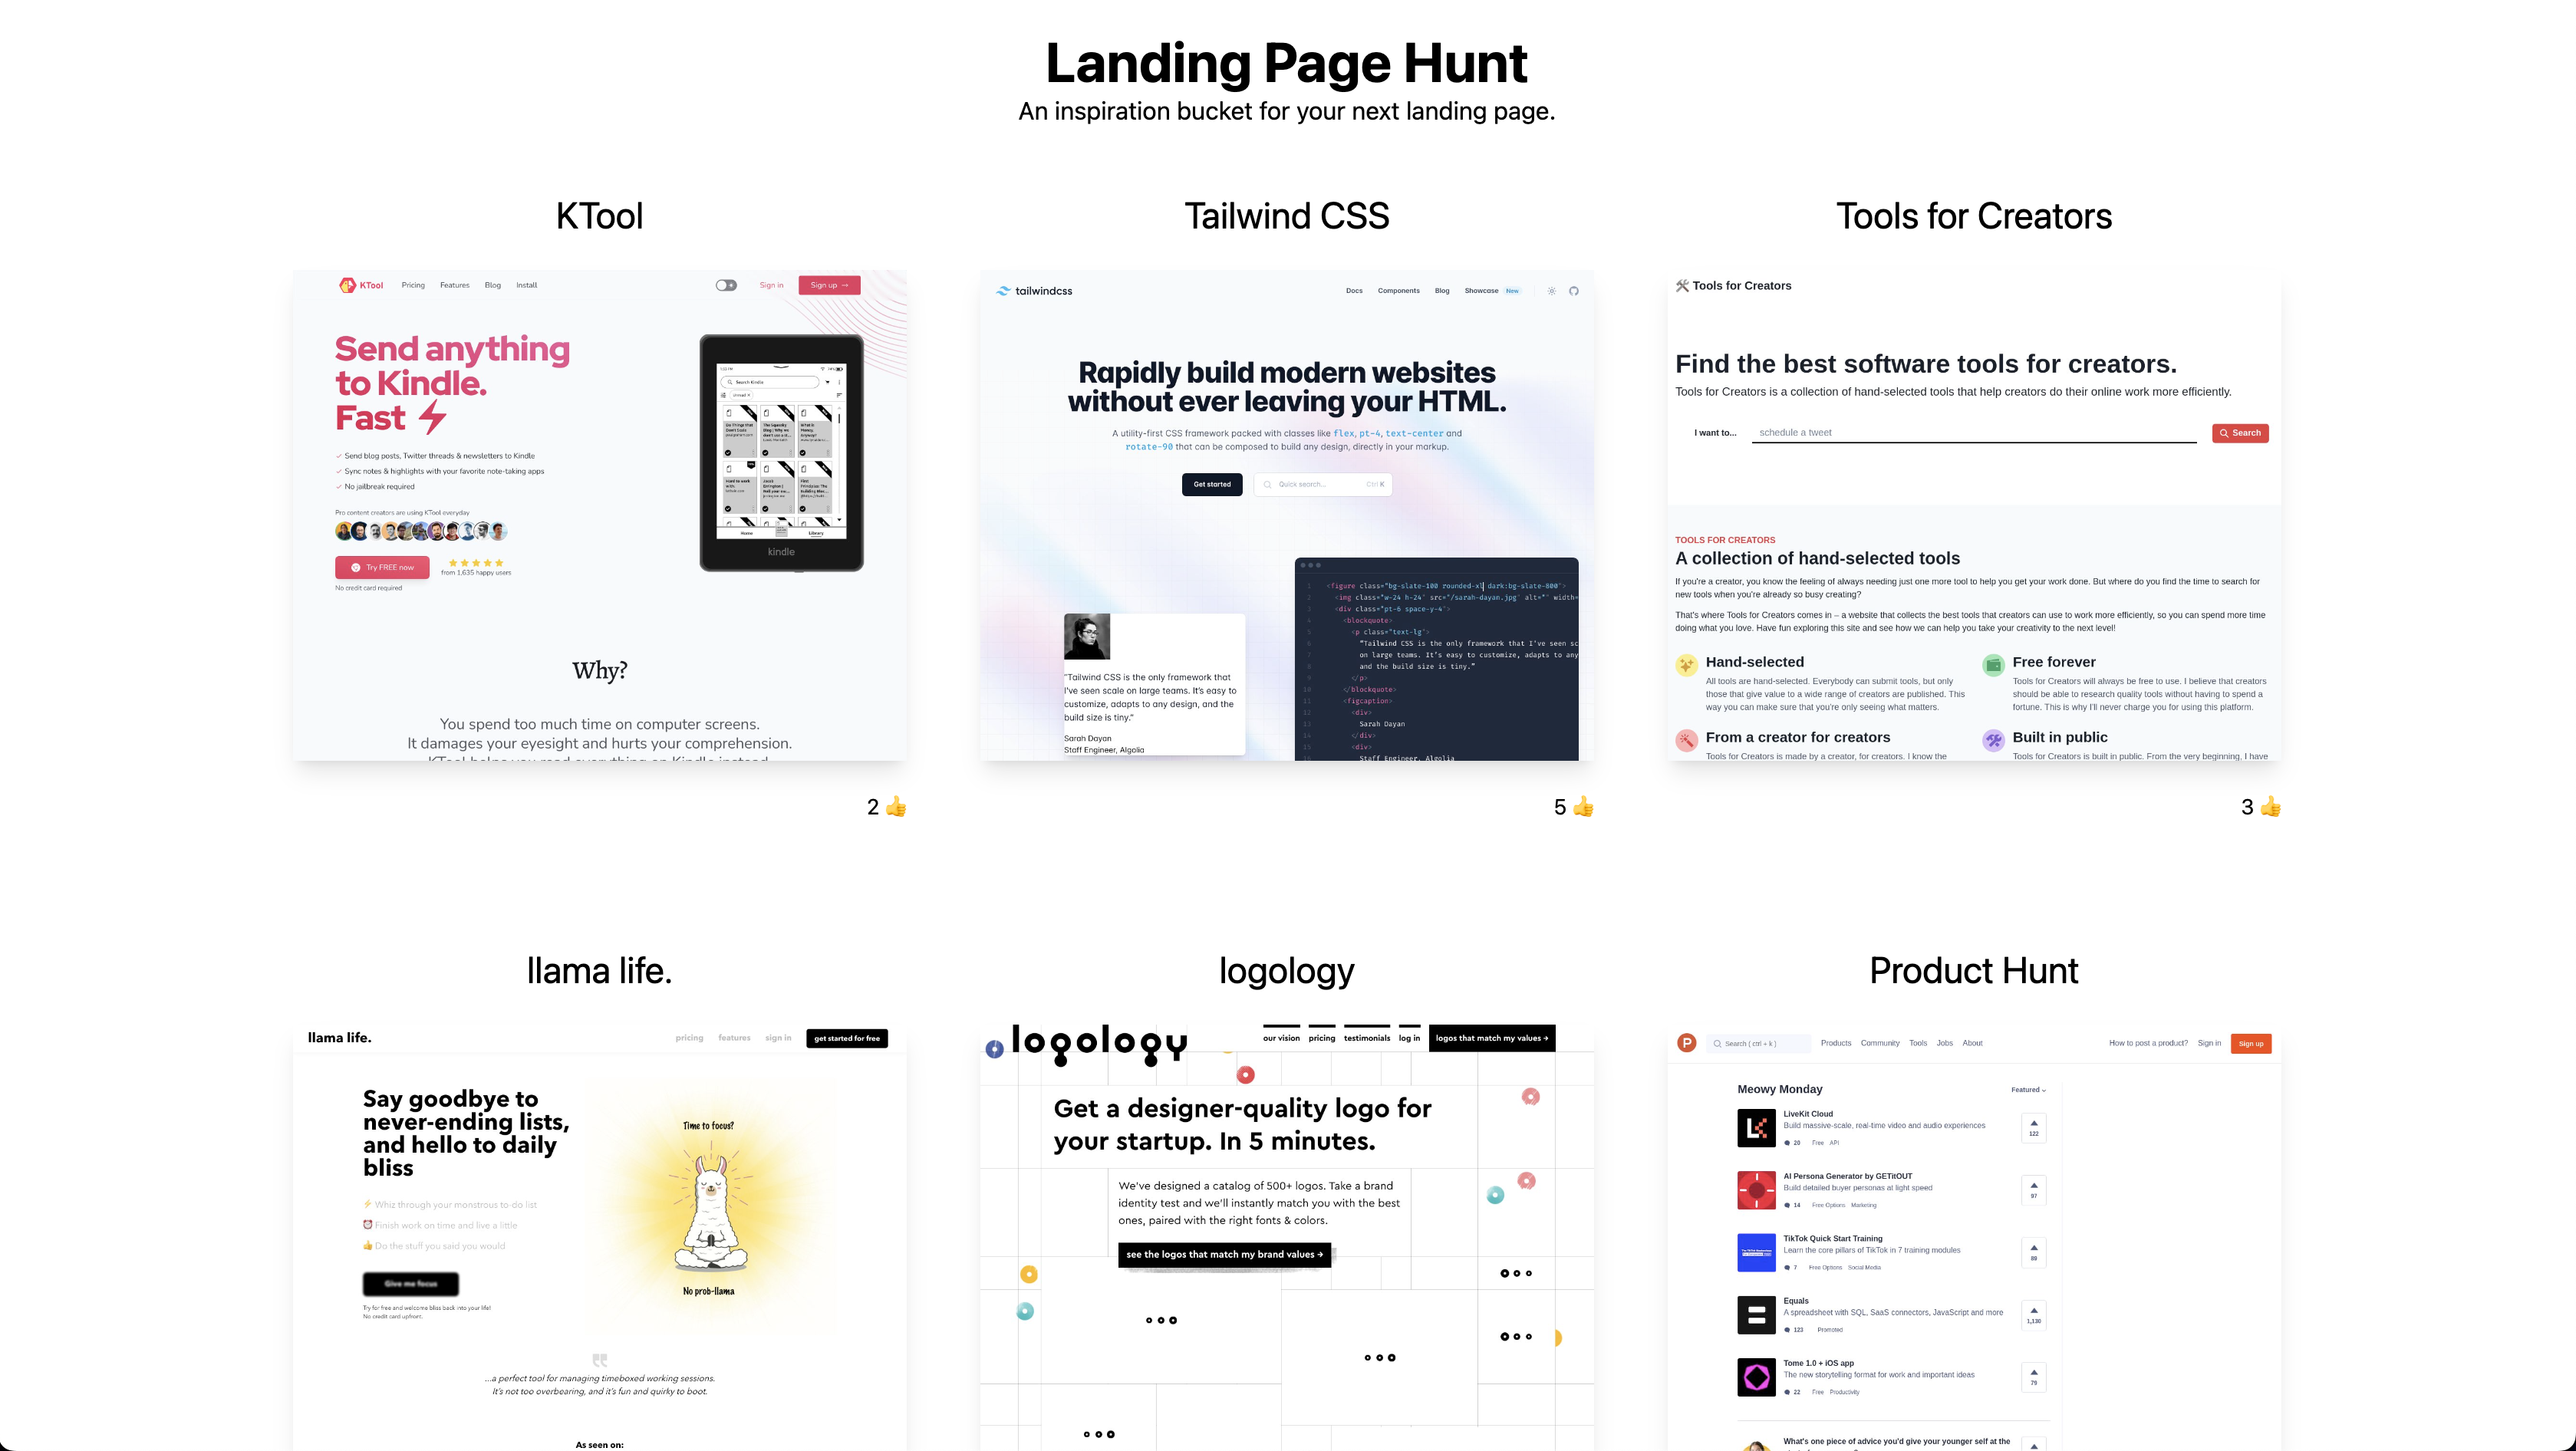 A screenshot of the Landing Page Hunt project